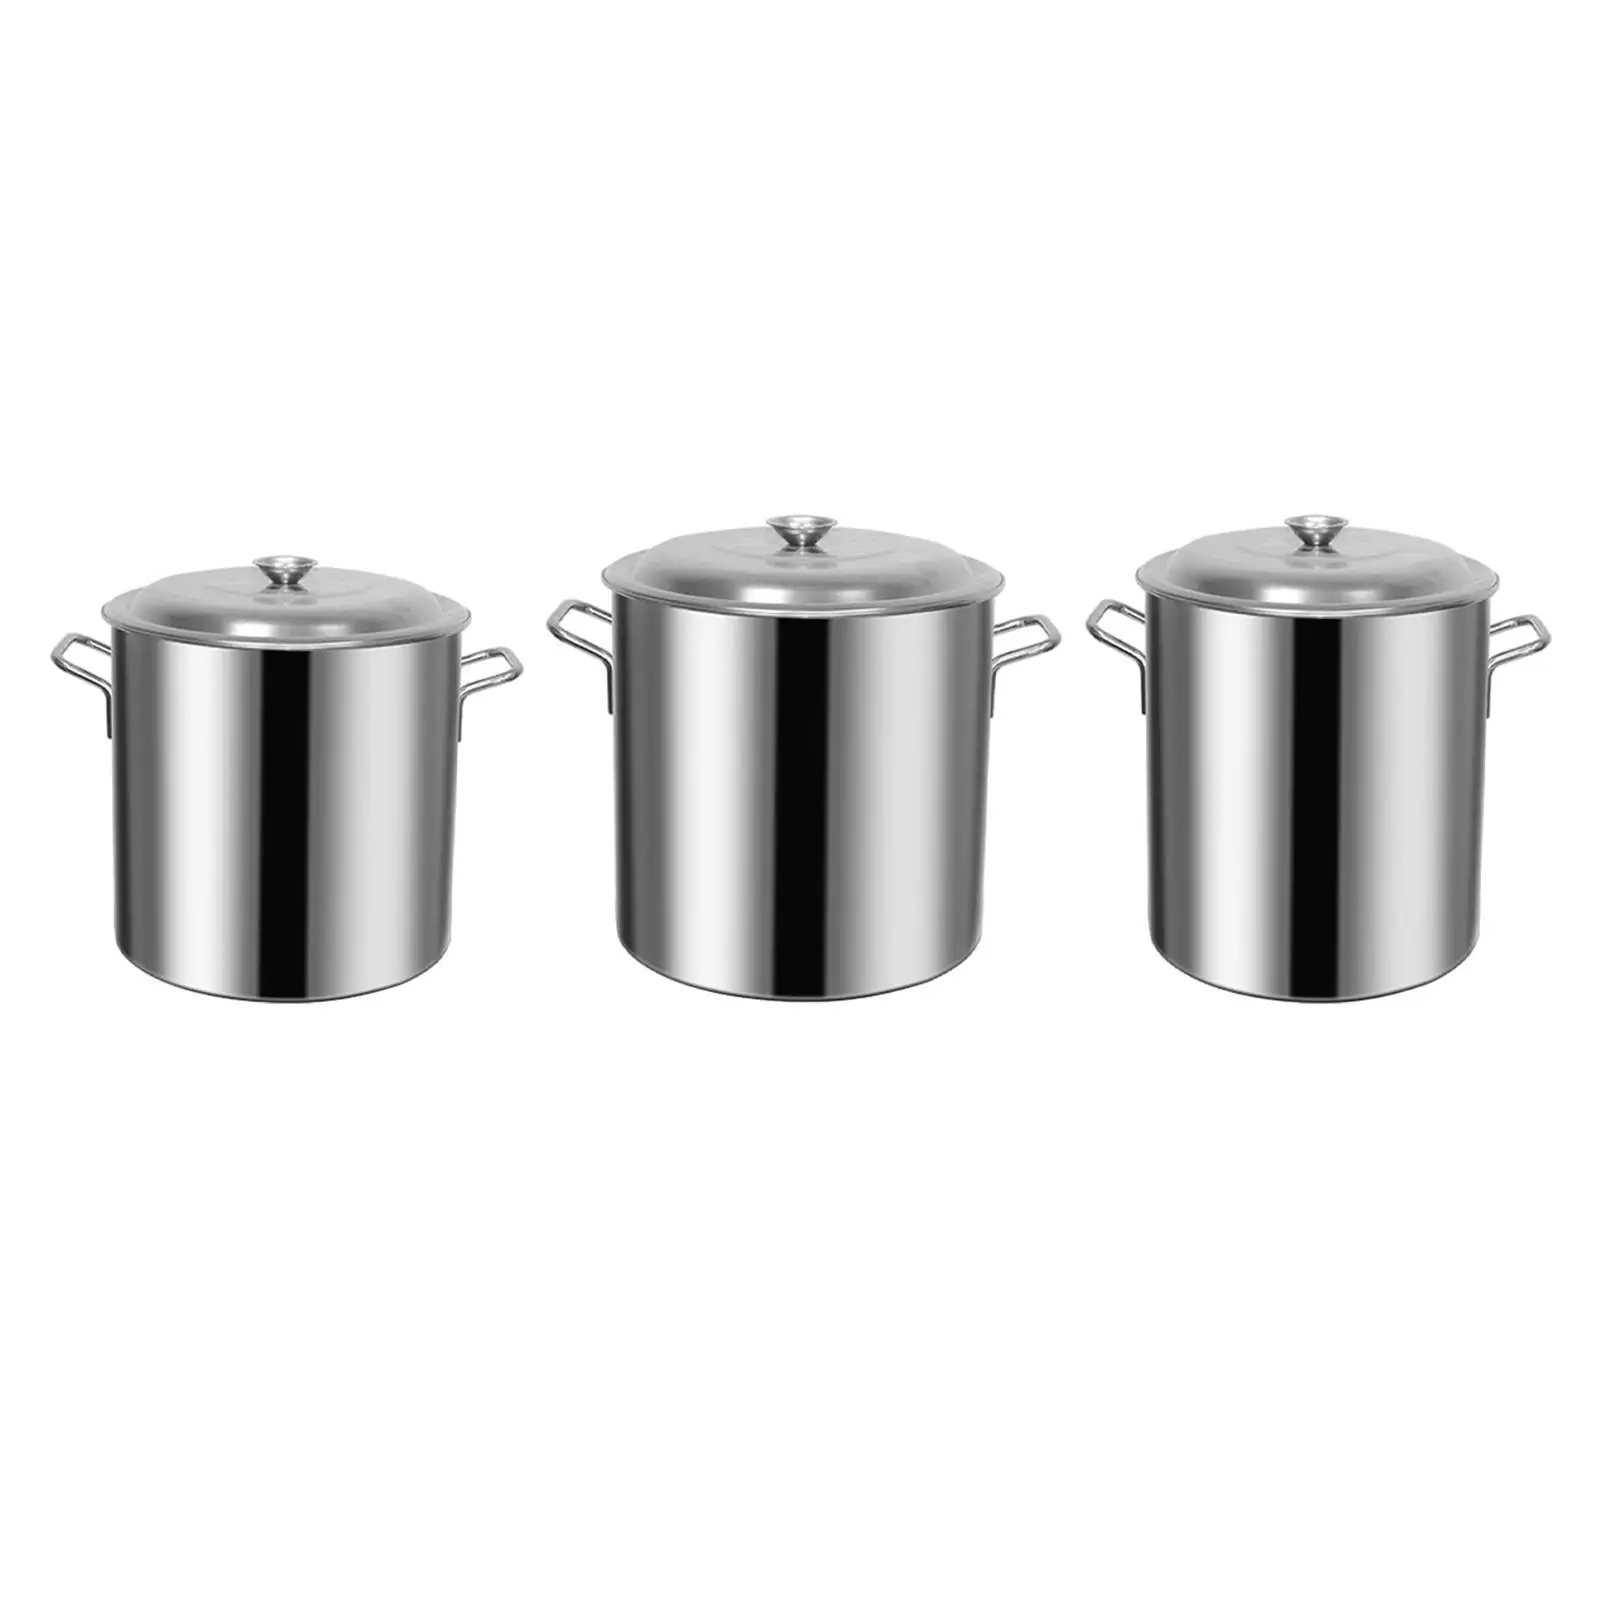 Cater Stew Soup Boiling Pan Multipurpose Cooking Pot for Commercial Canteens